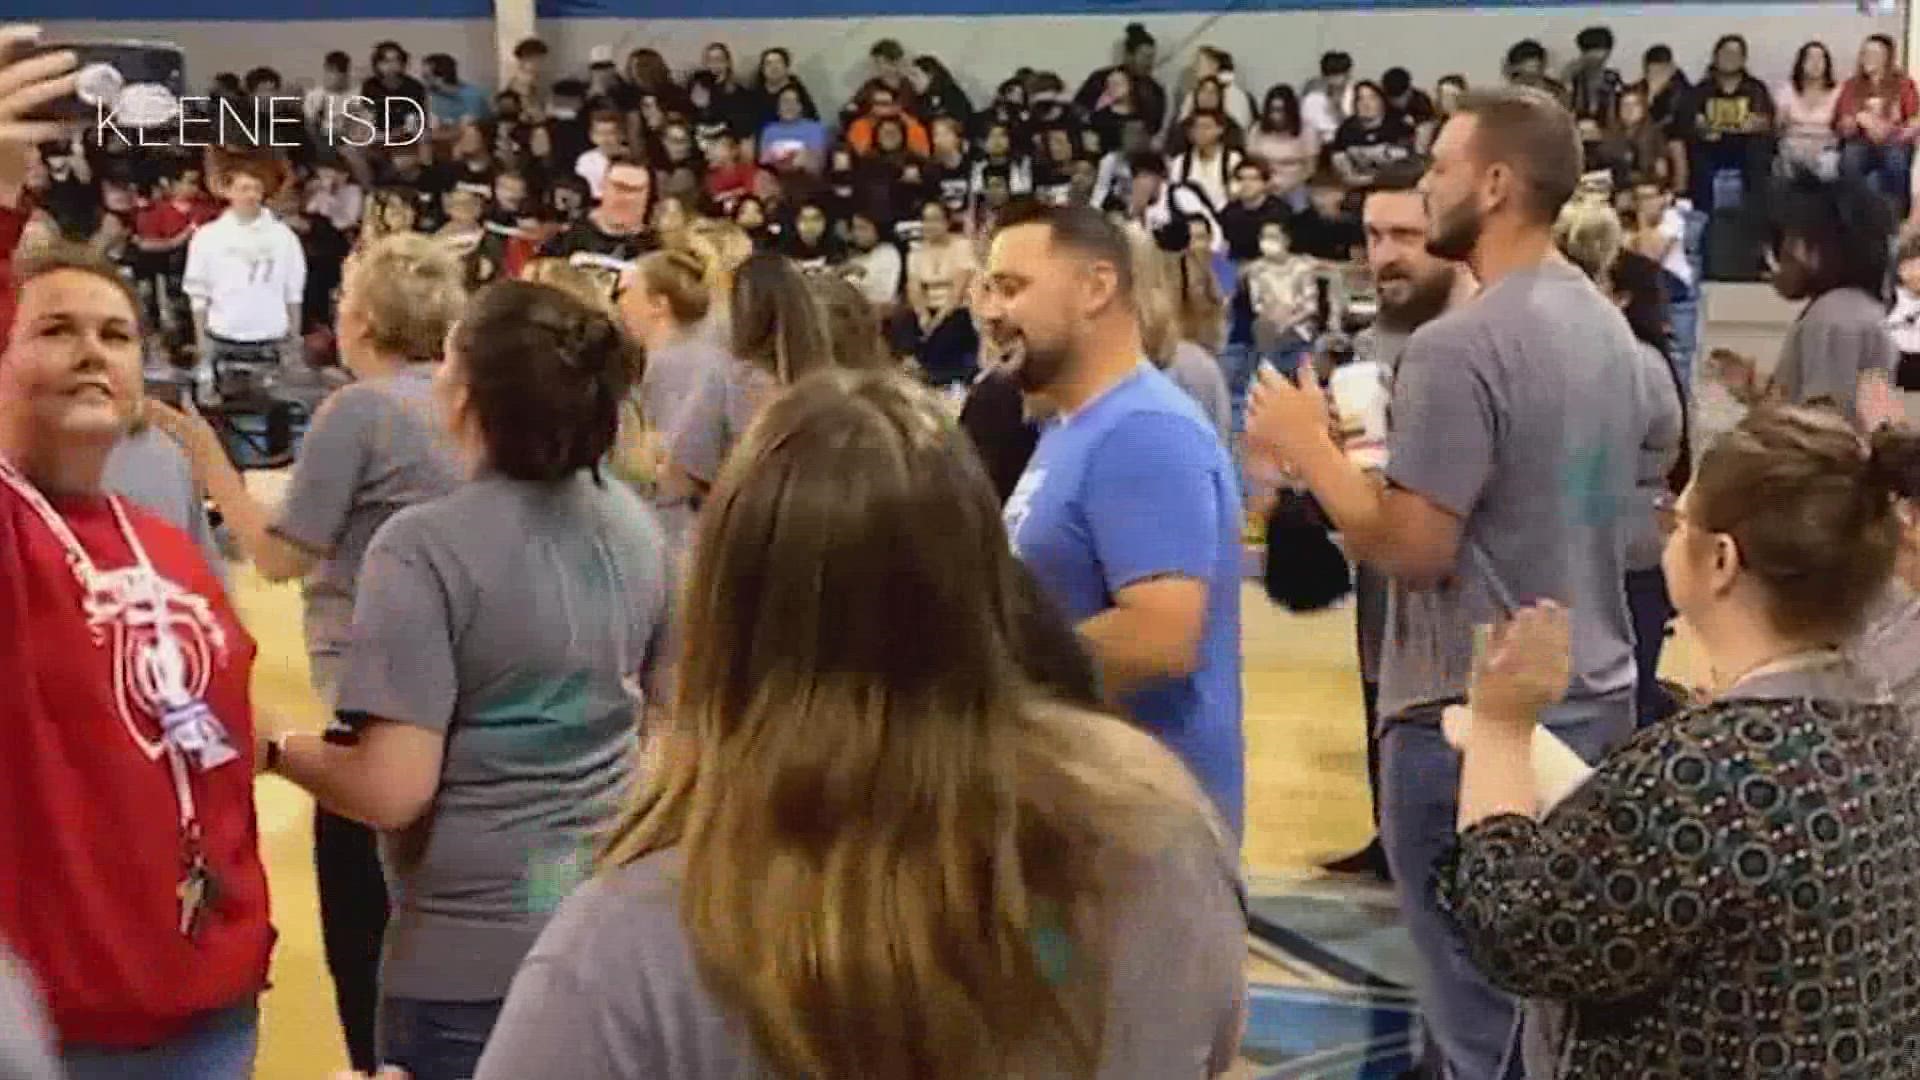 Keene ISD held a large pep-rally-style event to welcome back students. But some parents weren't happy with the lack of masks and social distancing.